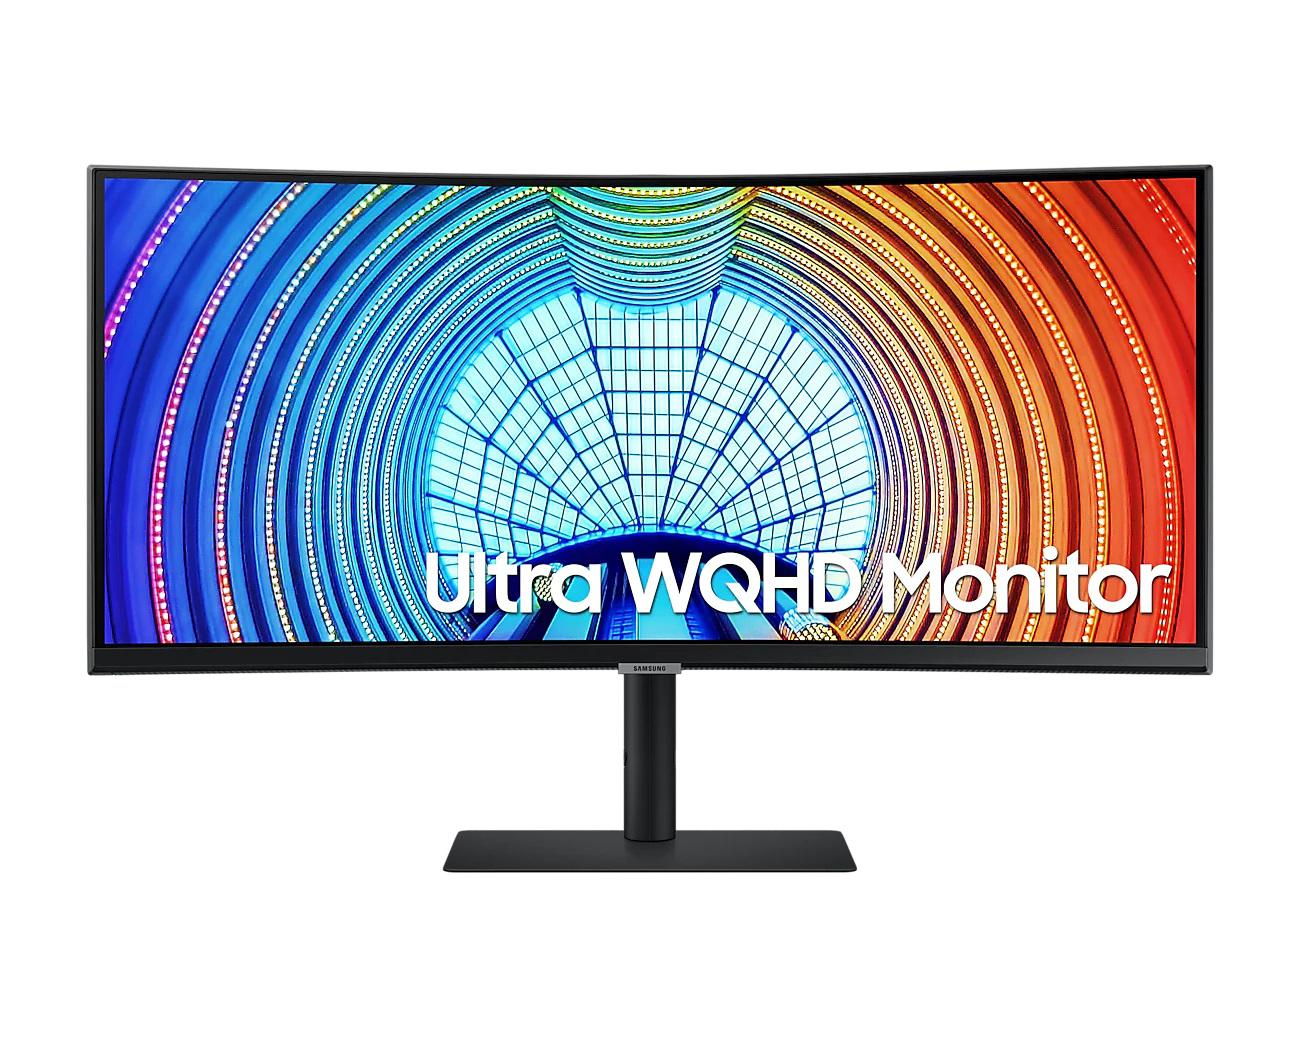 MONITOR 34" SAMSUNG LS34A650UBUXEN curved(1000R), Panel Type: VA ,Resolution: 3440 x 1440, Aspect Ratio: 21:9, Refresh Rate: 100Hz,Response Time: 5ms, Brightness: 350cd/㎡ , Contrast(static): 4000:1,Contrast(dynamic): Mega ∞ DCR, Viewing Angle: 178/178, Color Gamut(NTSC/sRGB/Adobe RGB/DCI-P3): 72%